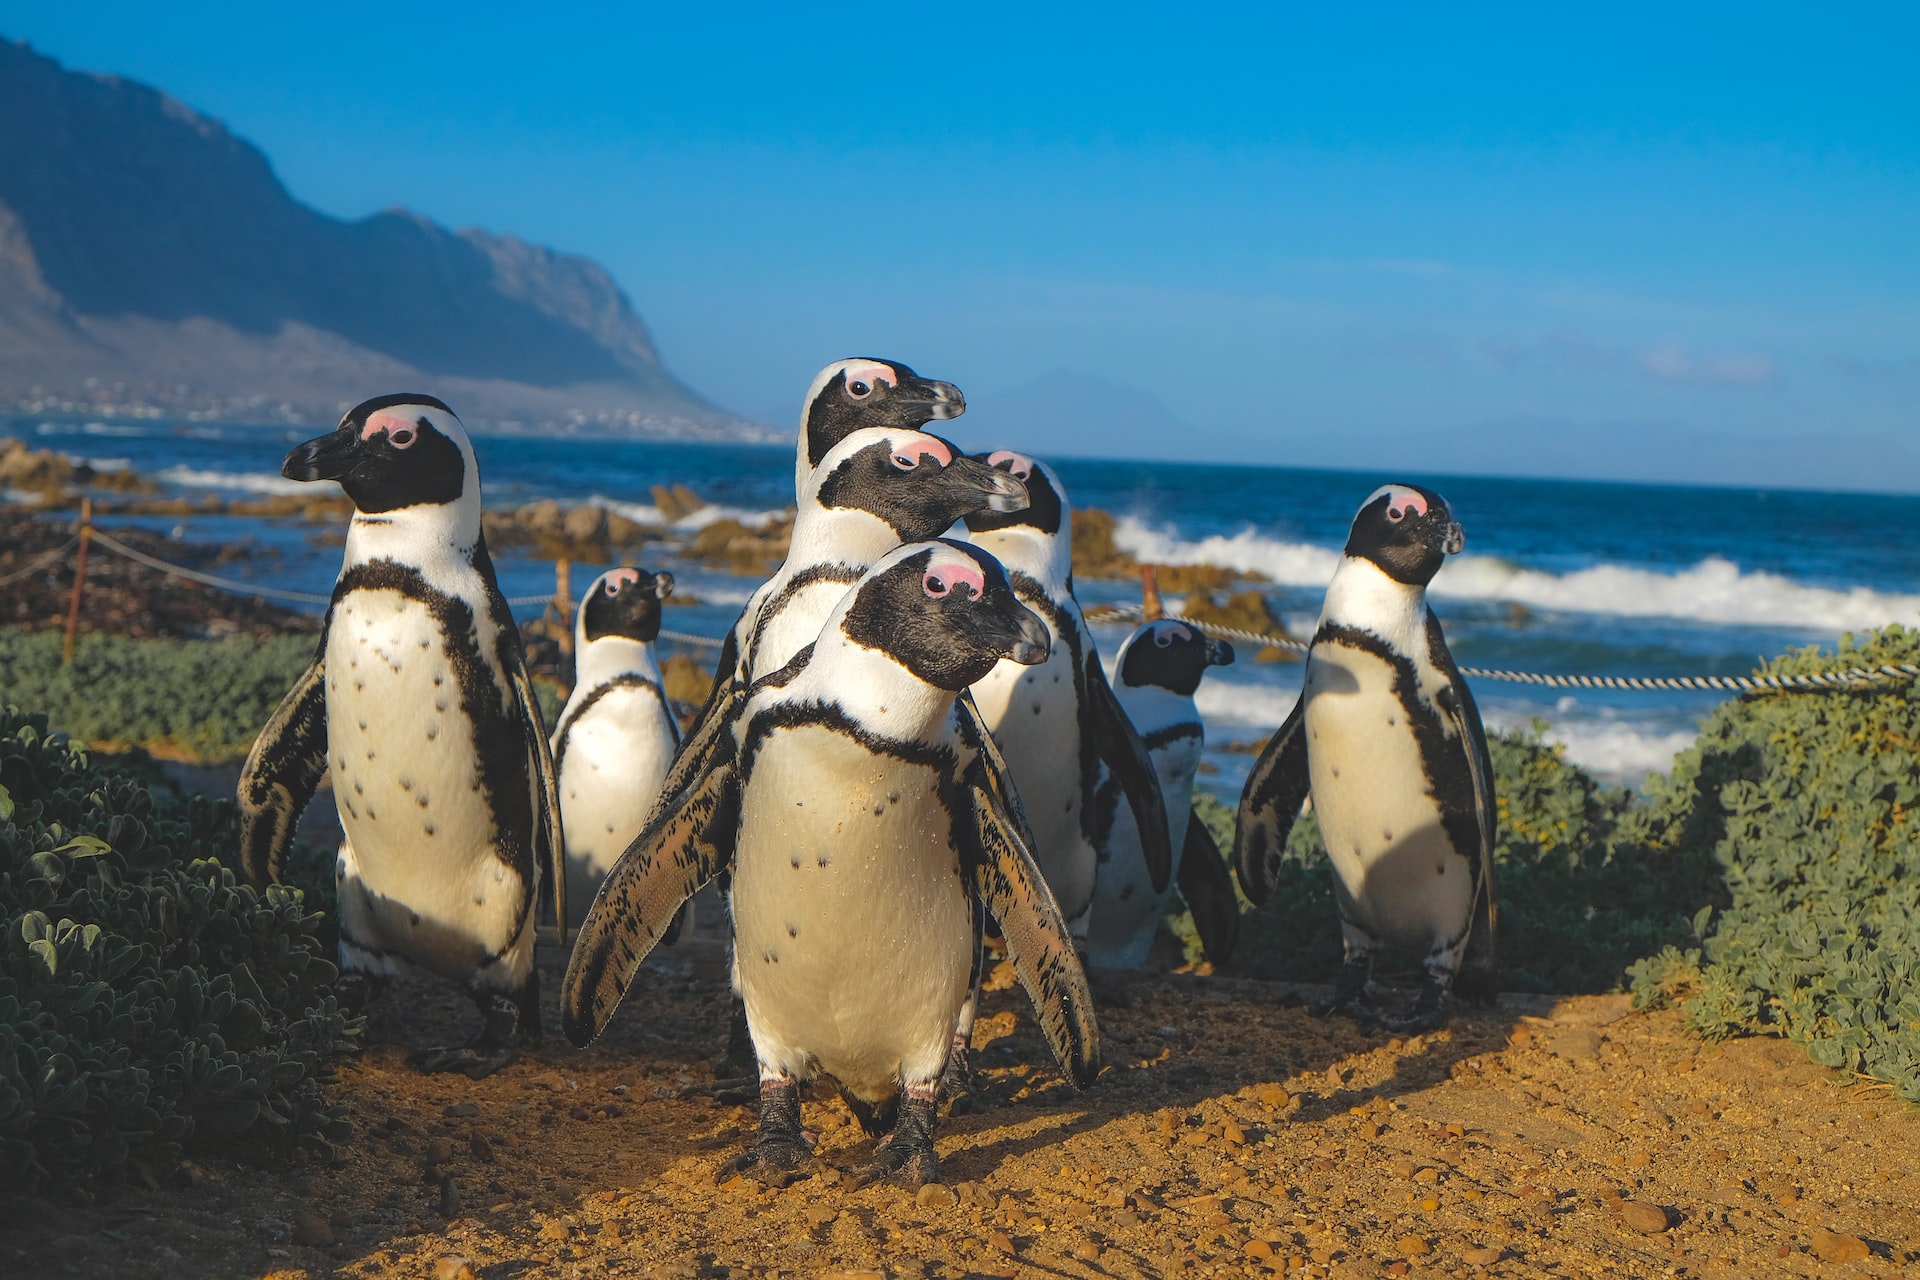 Africa bucket list penguins in south africa
